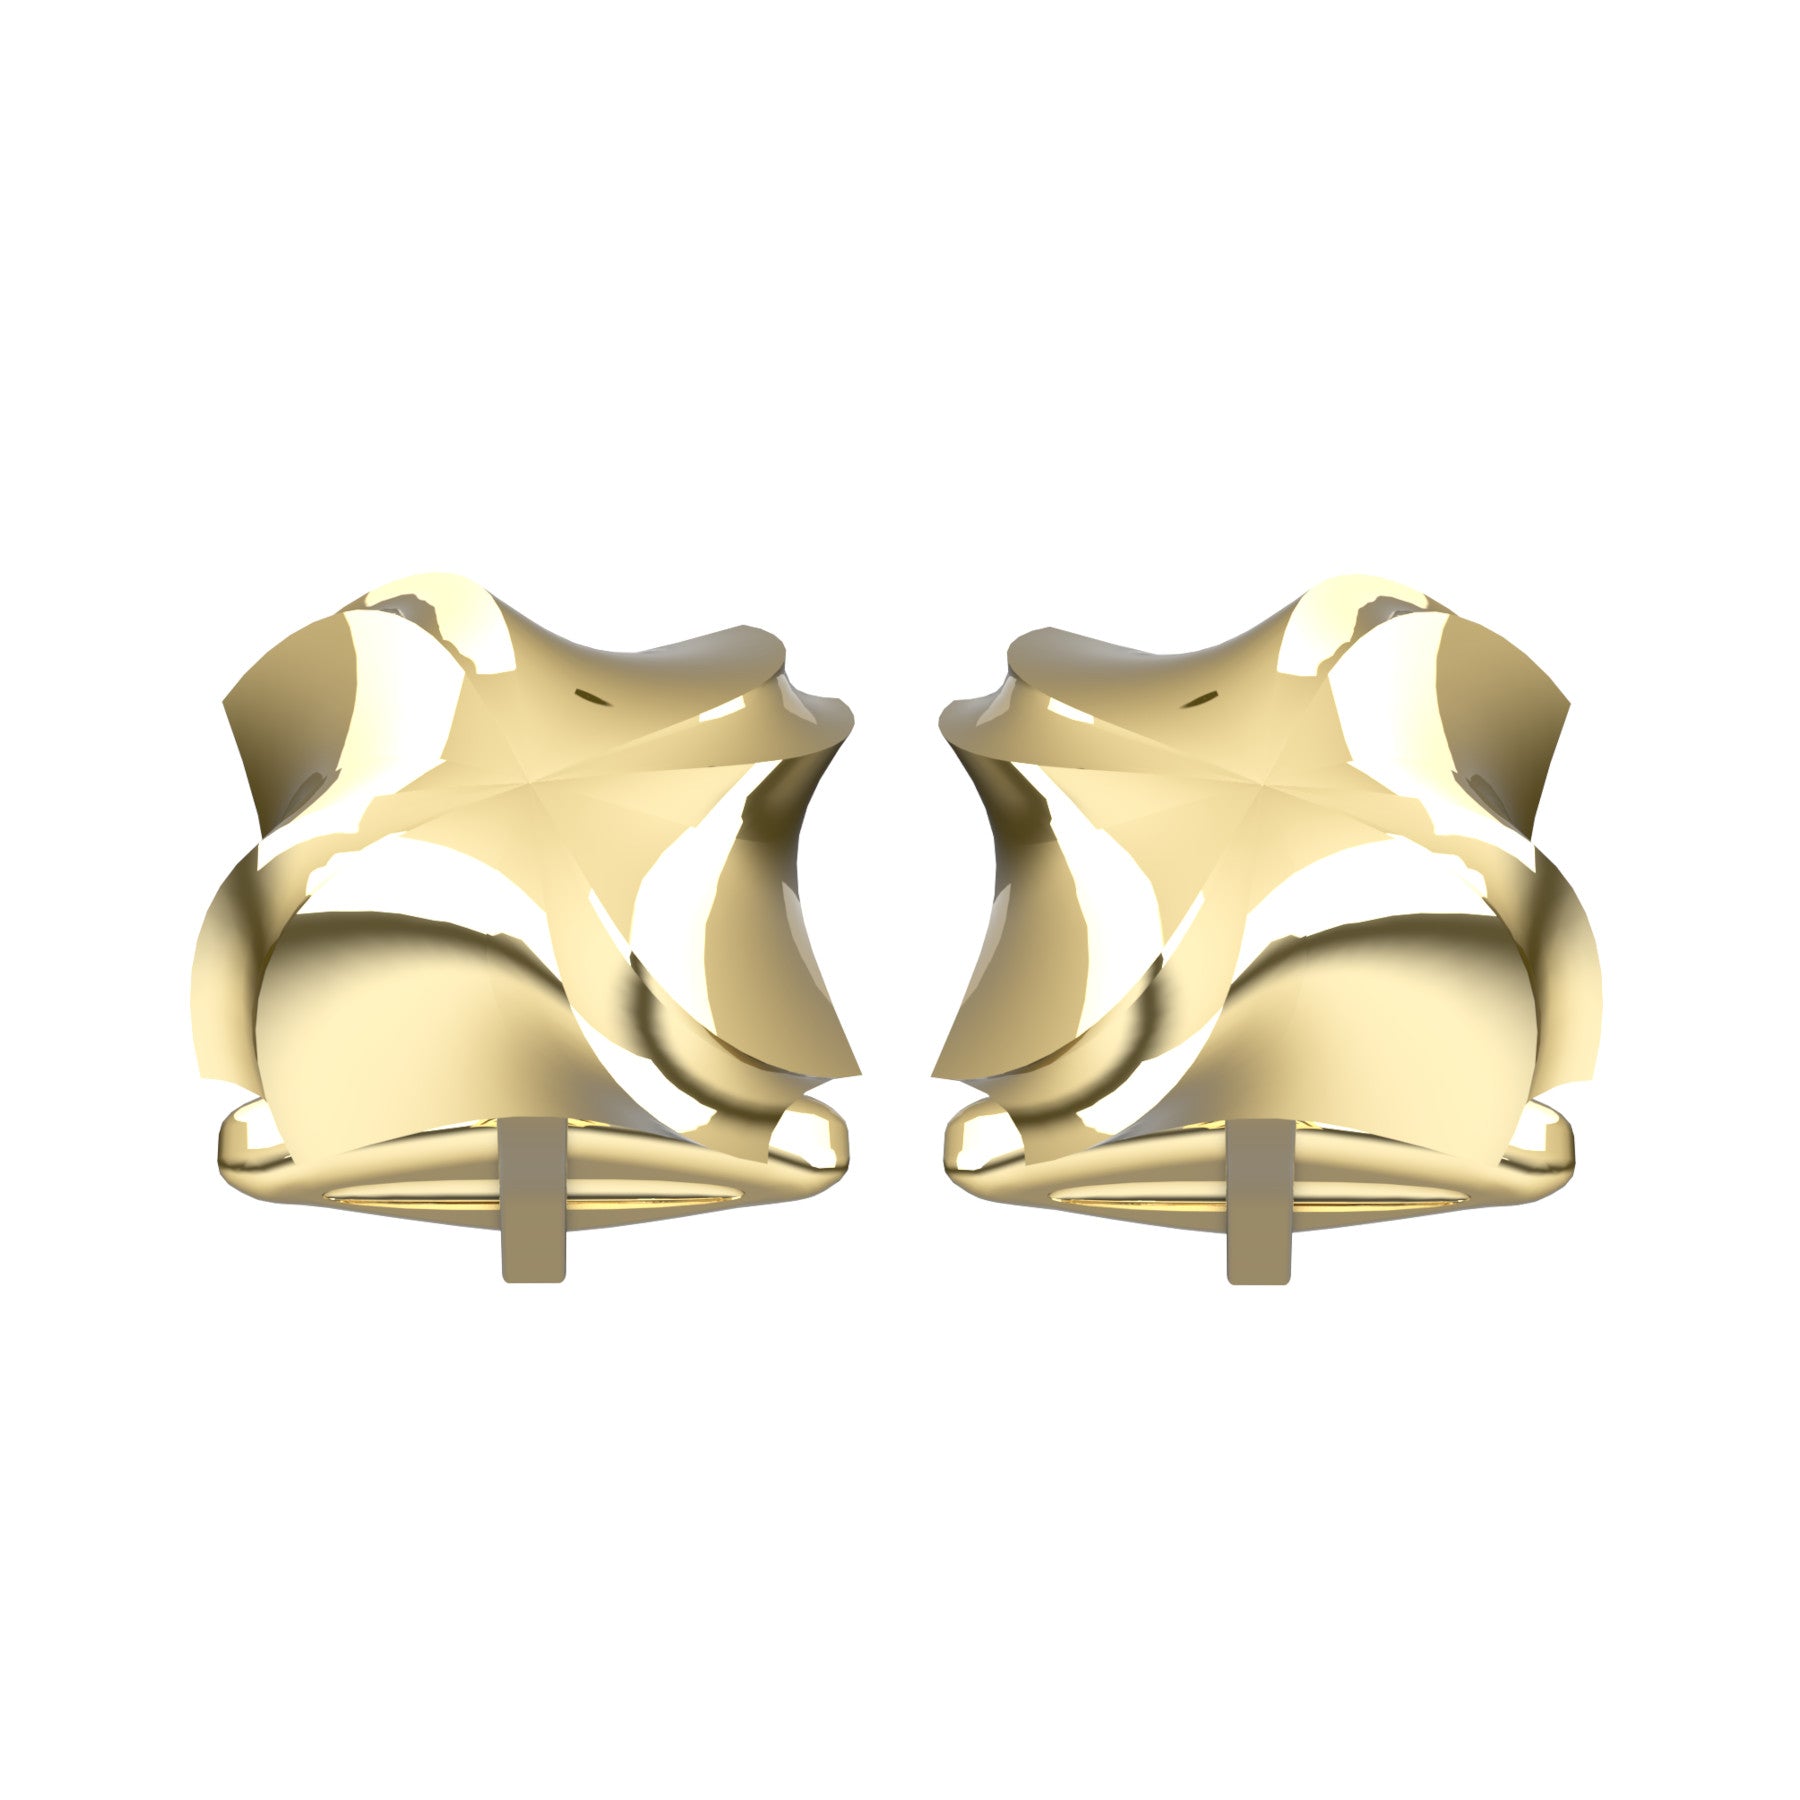 domed square cufflinks, 18 K yellow gold,  weight about 9,2 g. (0,32 oz), size 15x15x4 mm max